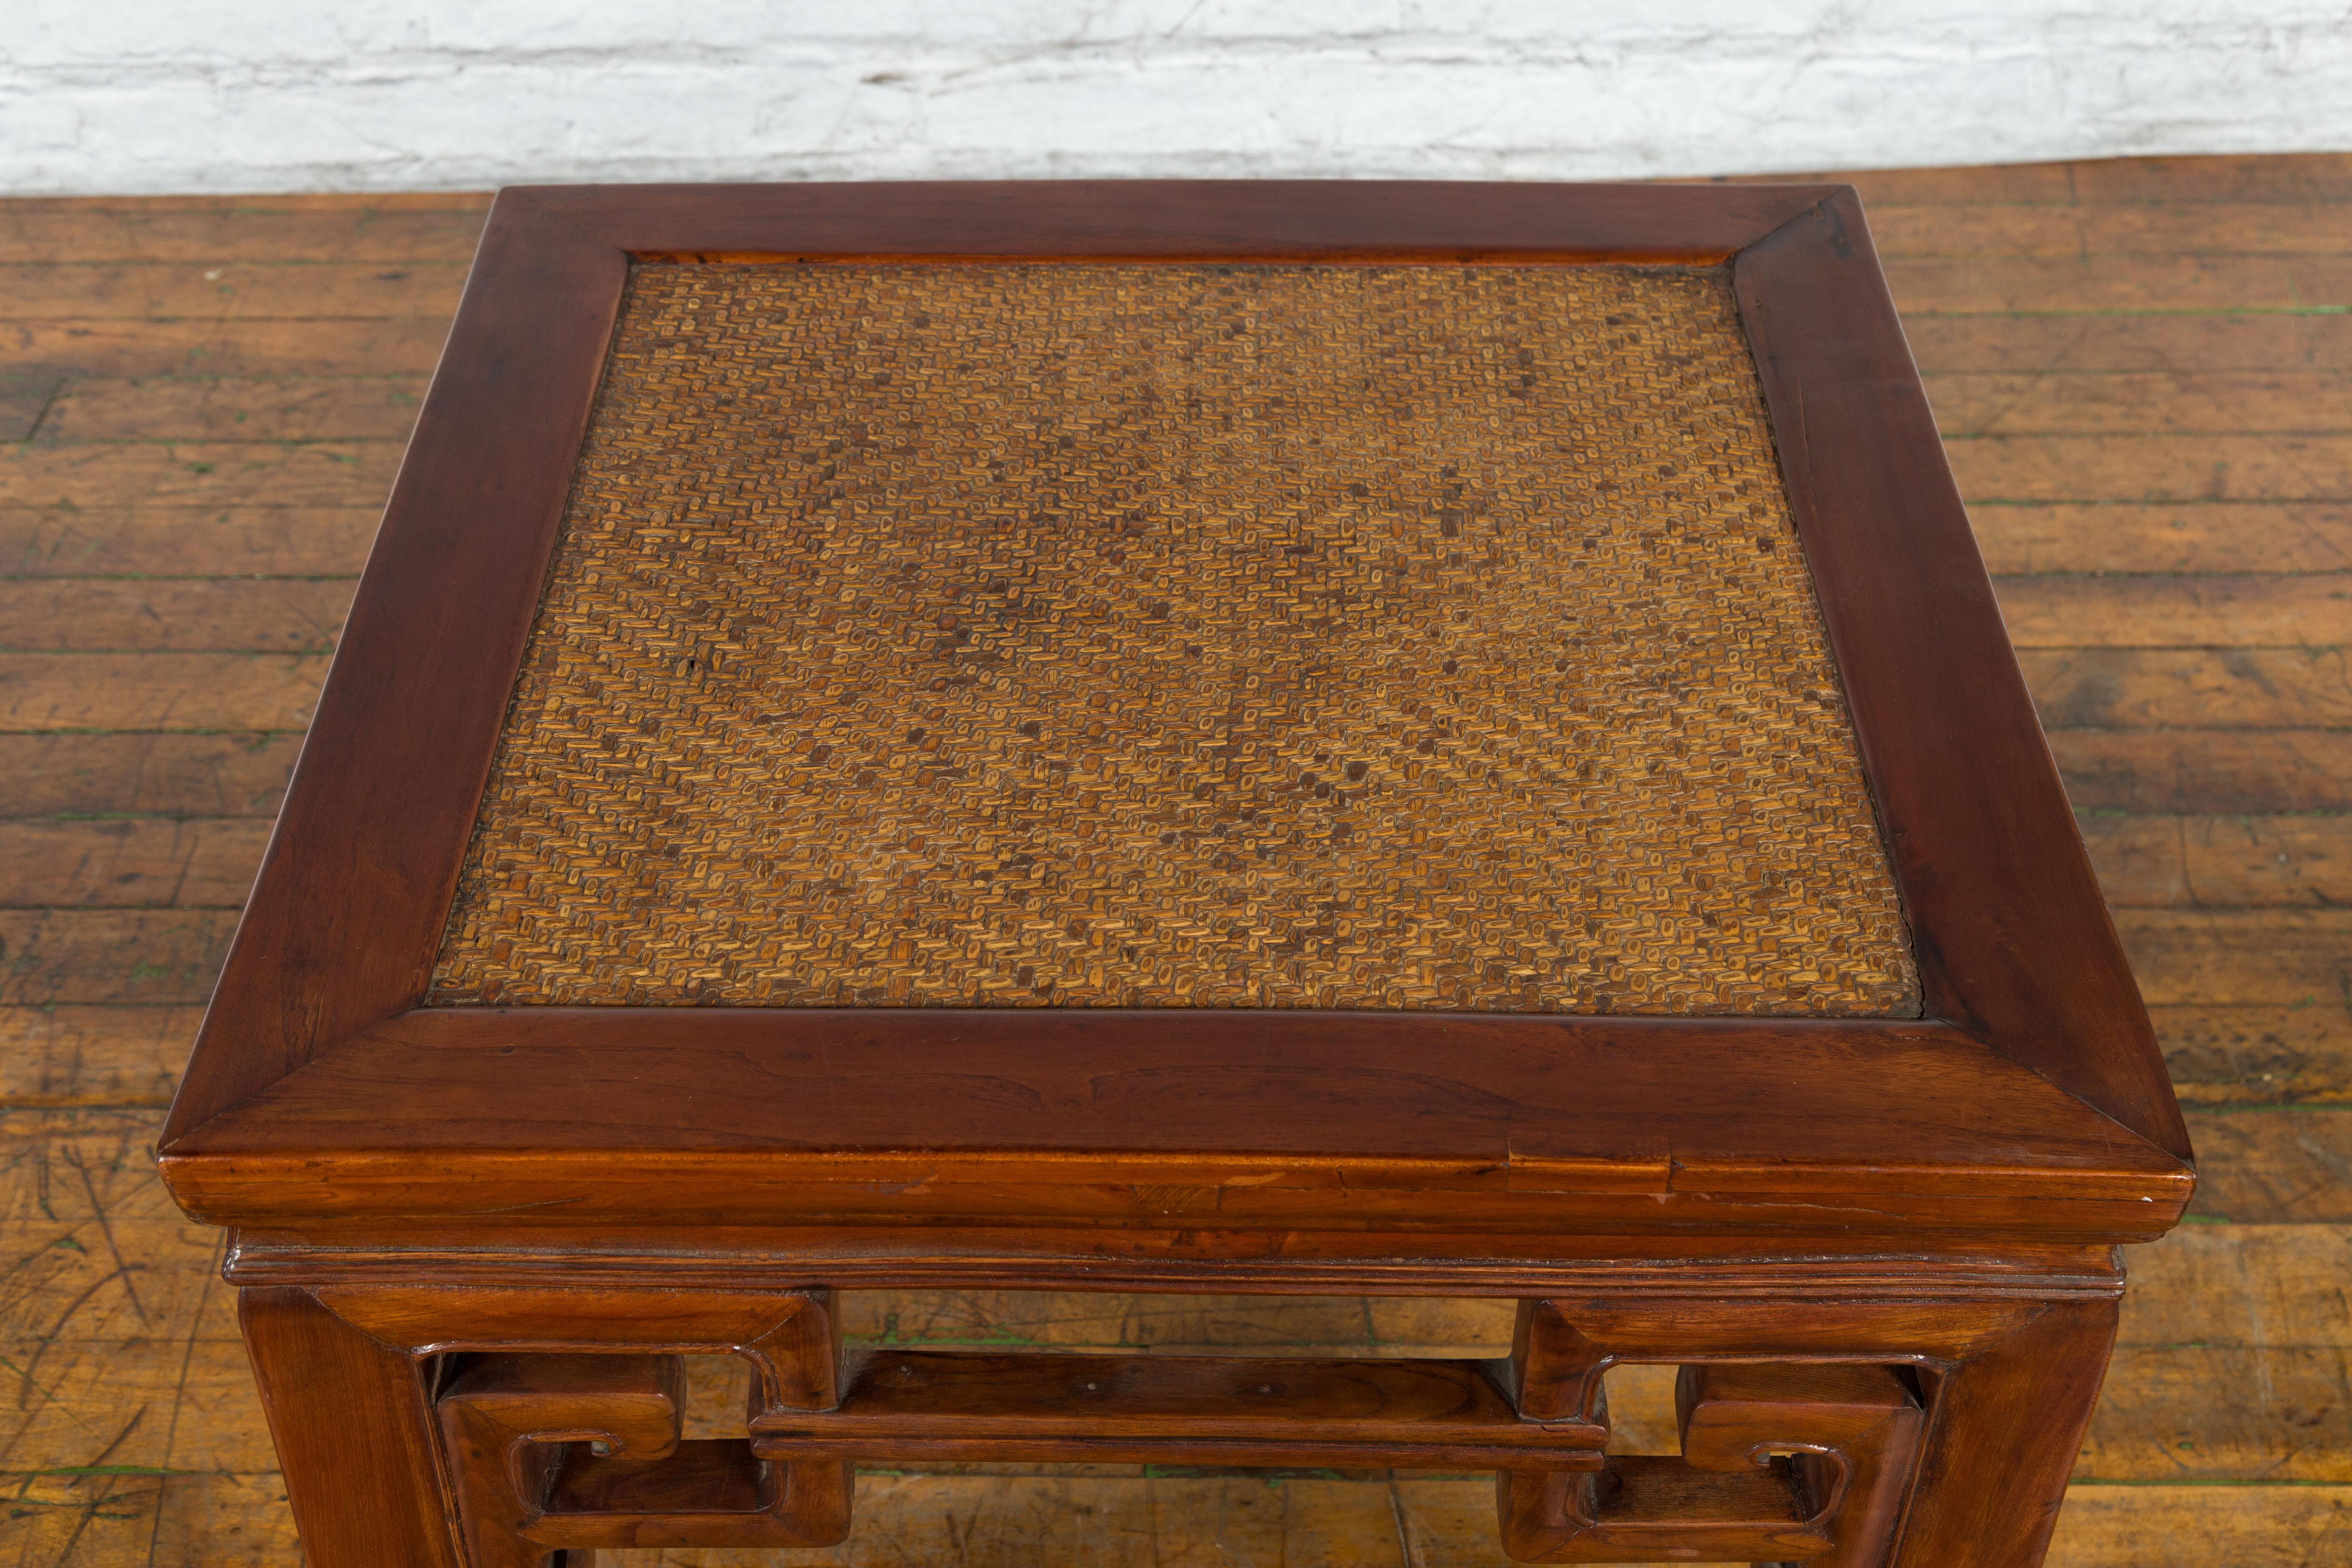 Chinese Qing Dynasty 19th Century Stool or Drinks Table with Woven Rattan Top For Sale 6